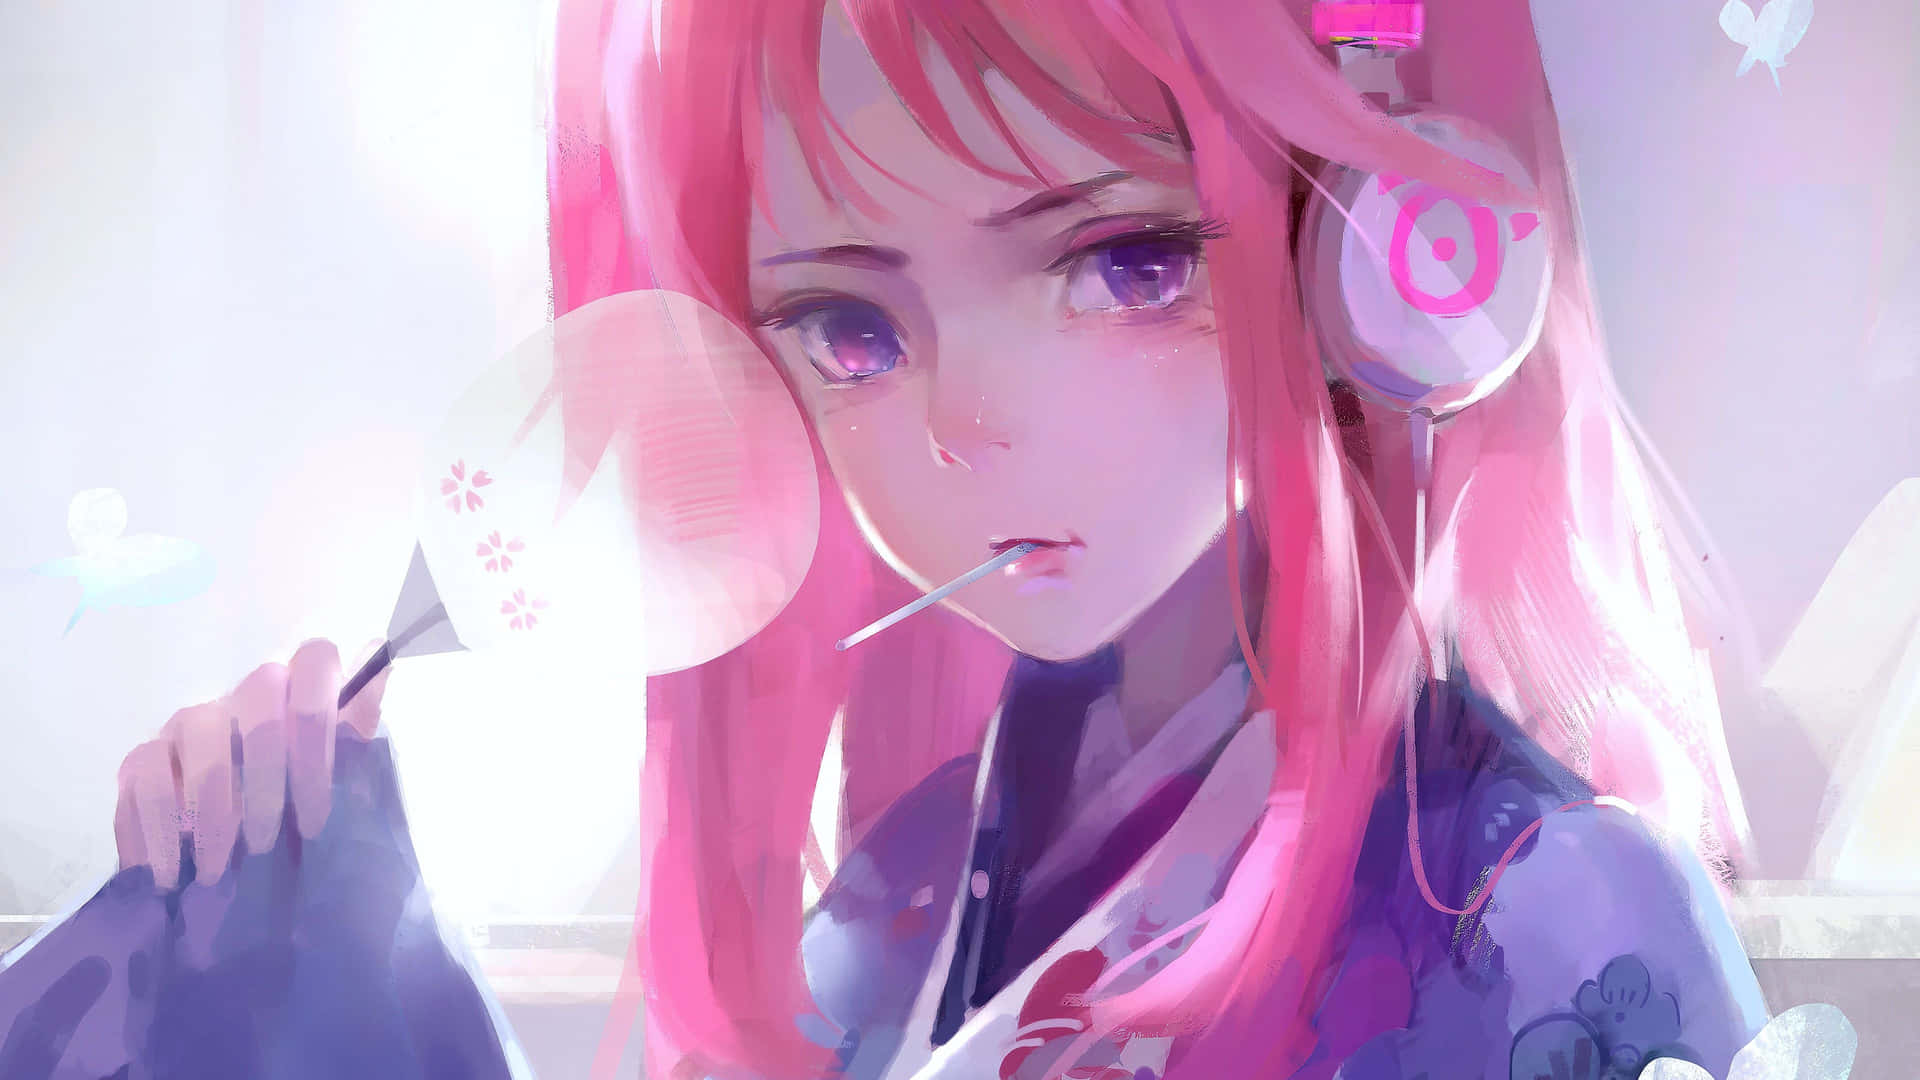 A bright, colorful and magical wallpaper featuring Aesthetic Pink Anime.